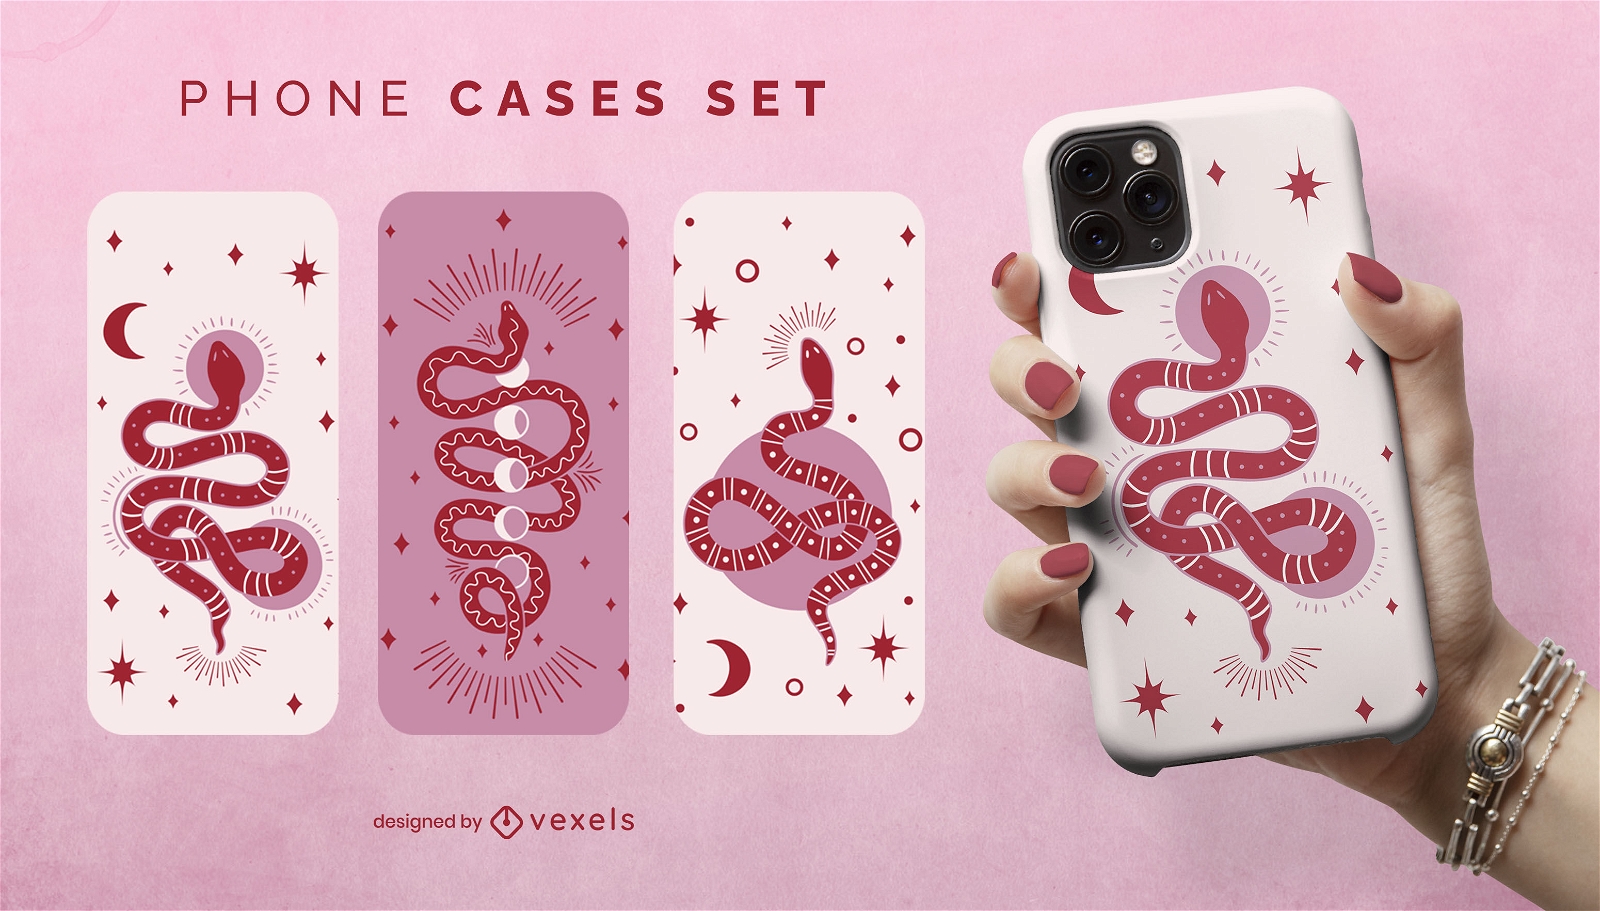 Esoterical snakes phone cases set